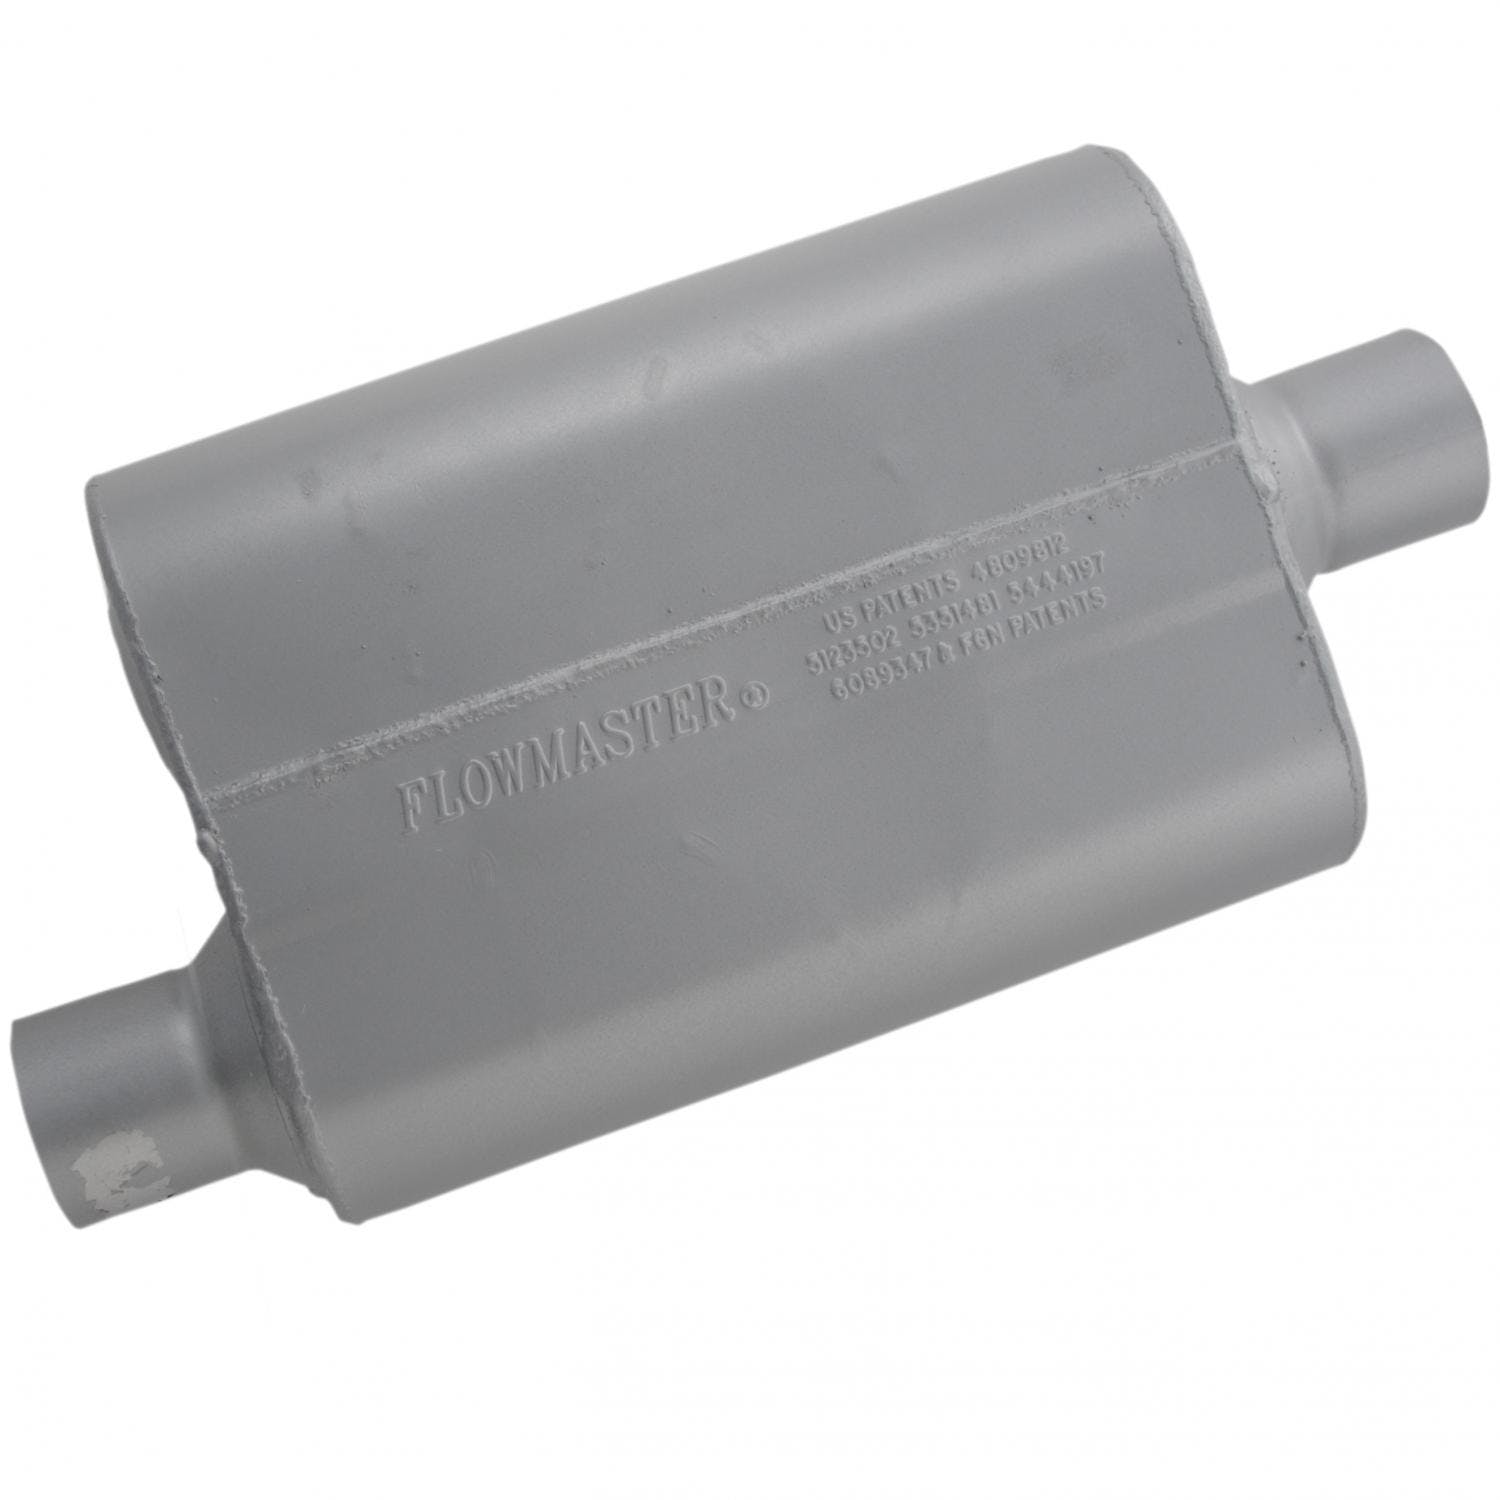 Flowmaster 42541 2.5IN (O)/OUT (C) 40 SERIES